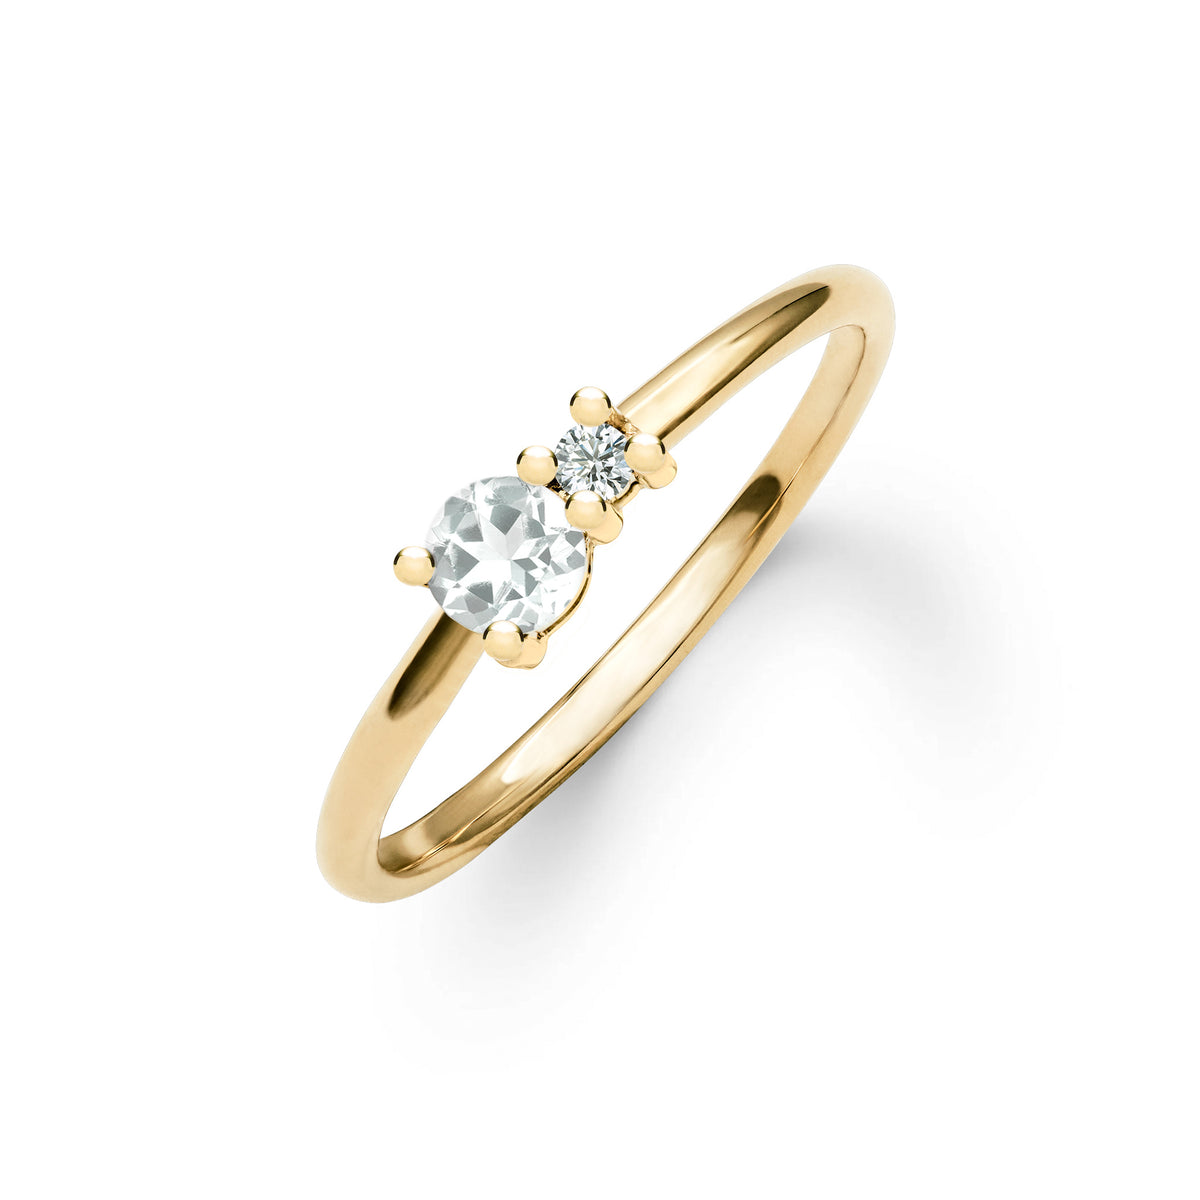 2mm Round Cut Diamond Ring in 14K Solid Gold, 0.03 Carat F-G White Dia